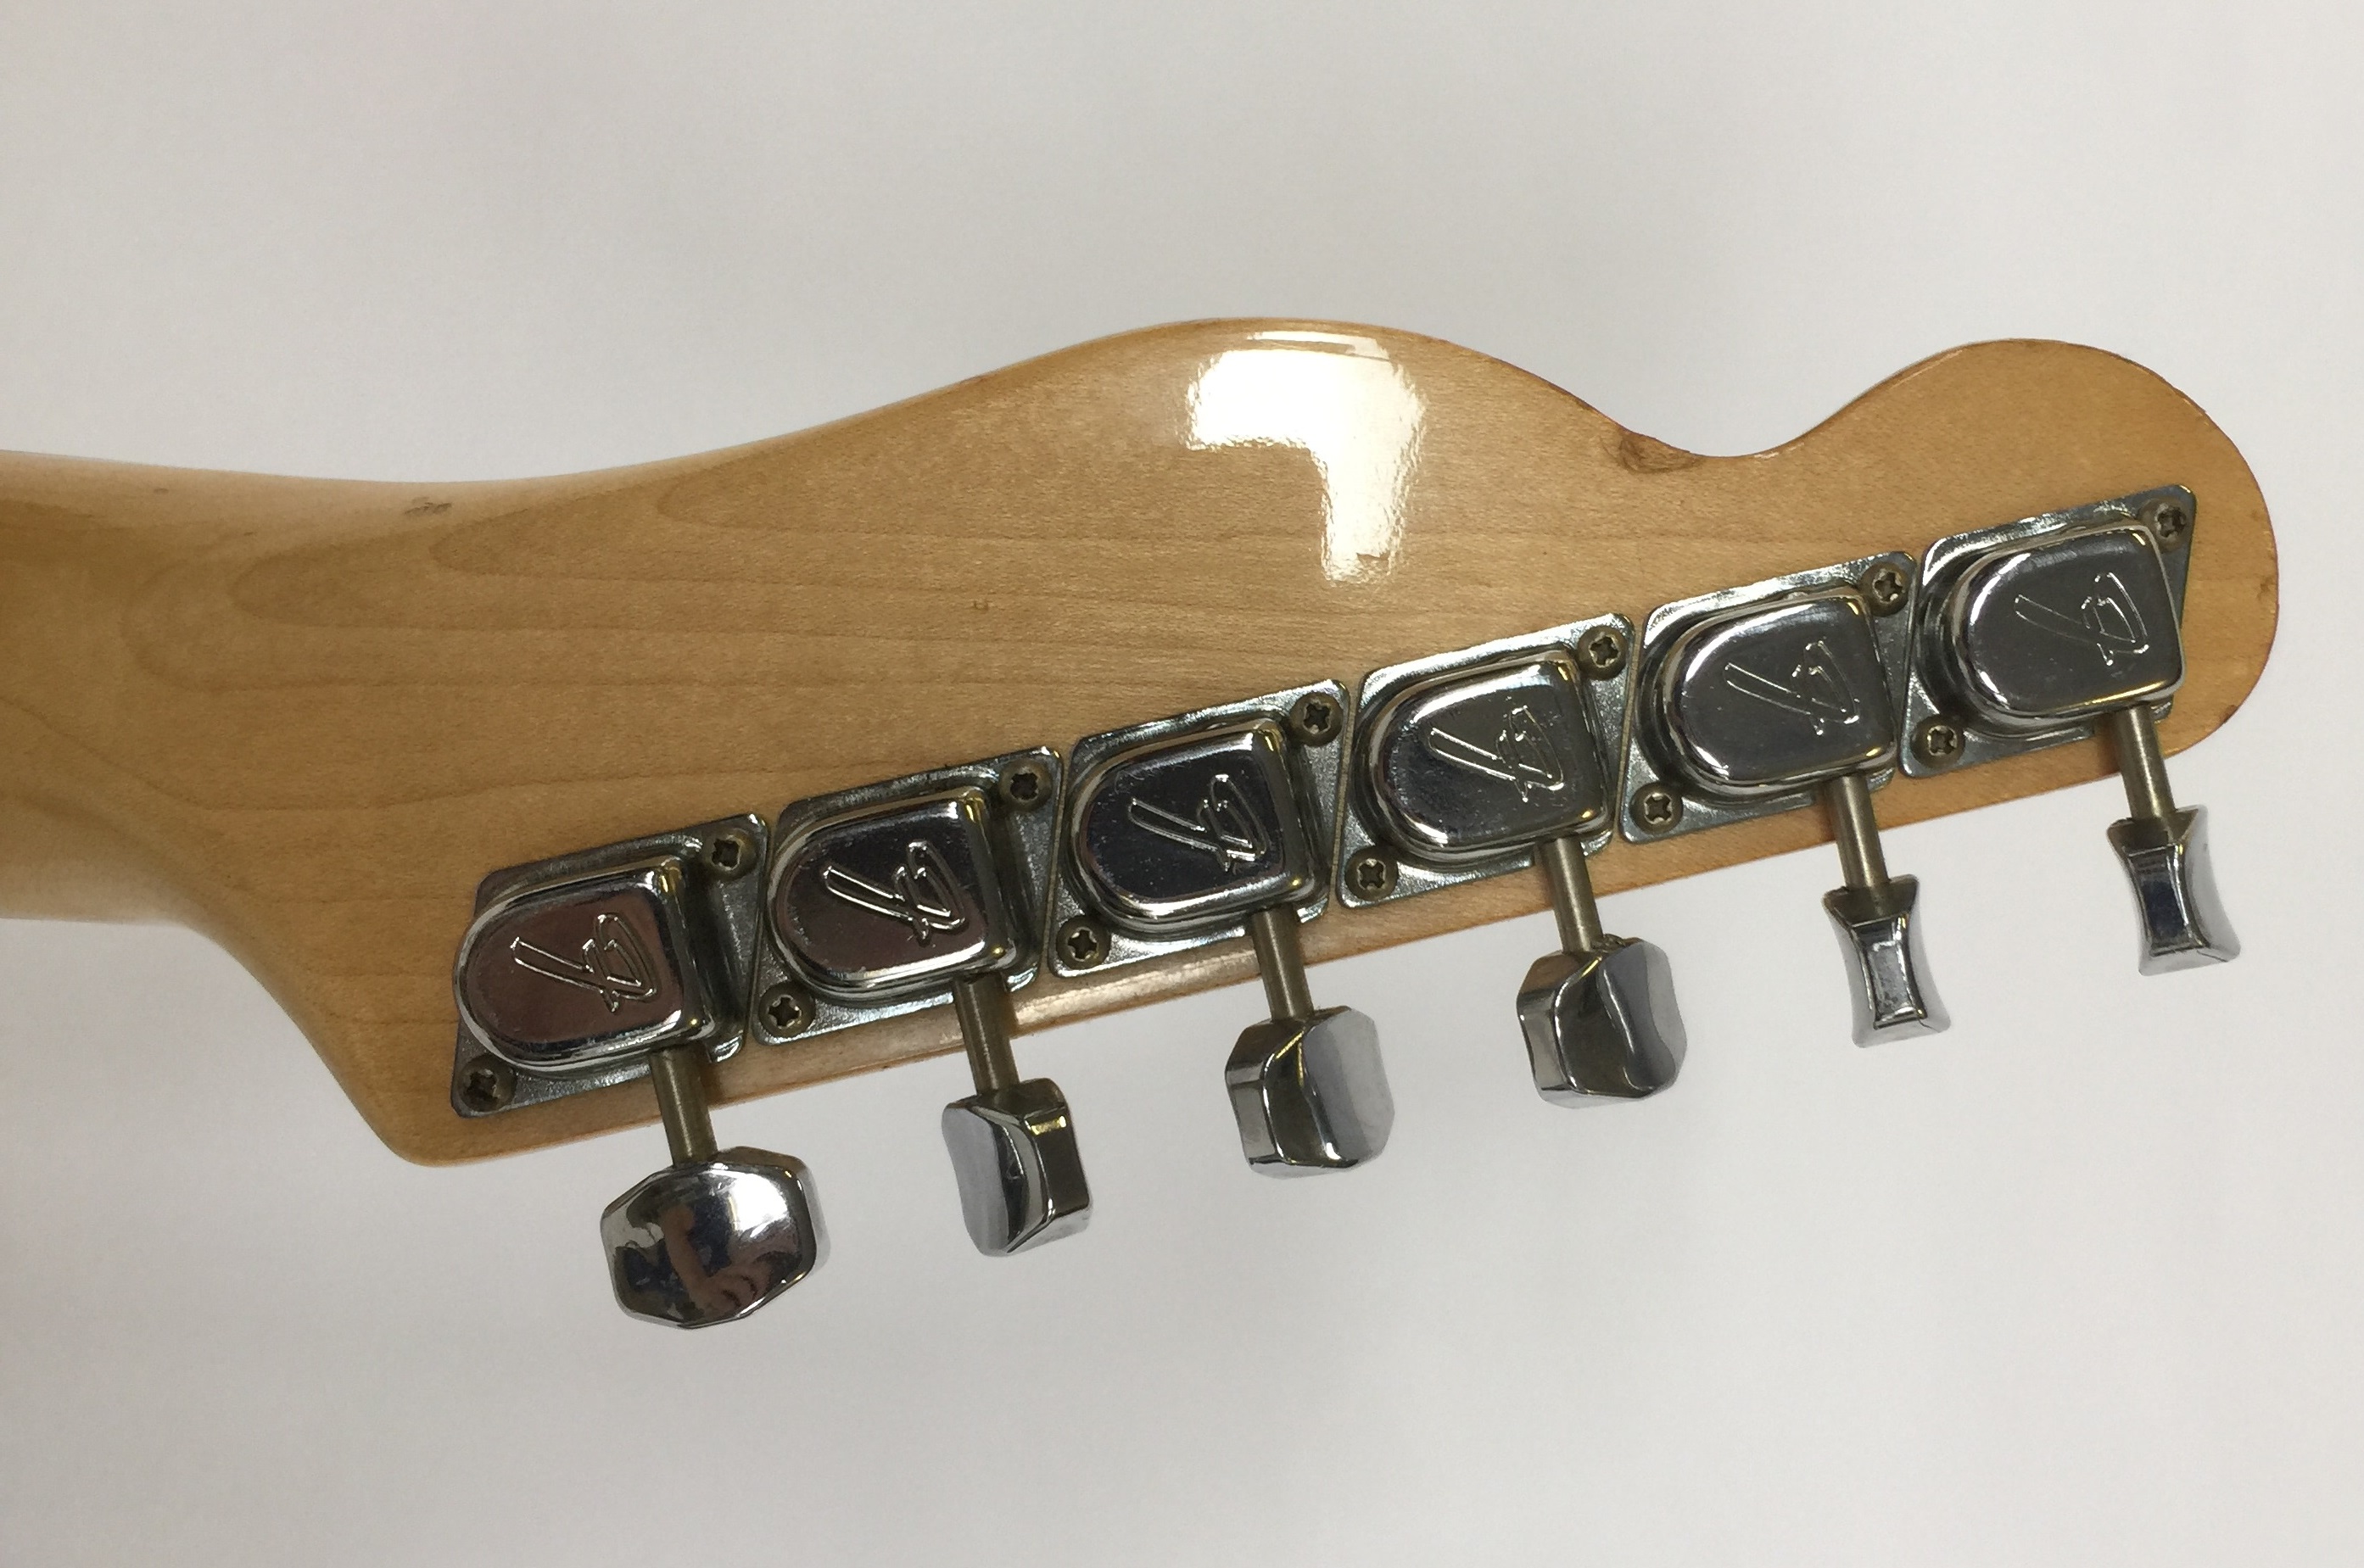 FENDER TELECASTER 1973 BLONDE - completely original and stunning example that has had one owner - Image 6 of 8